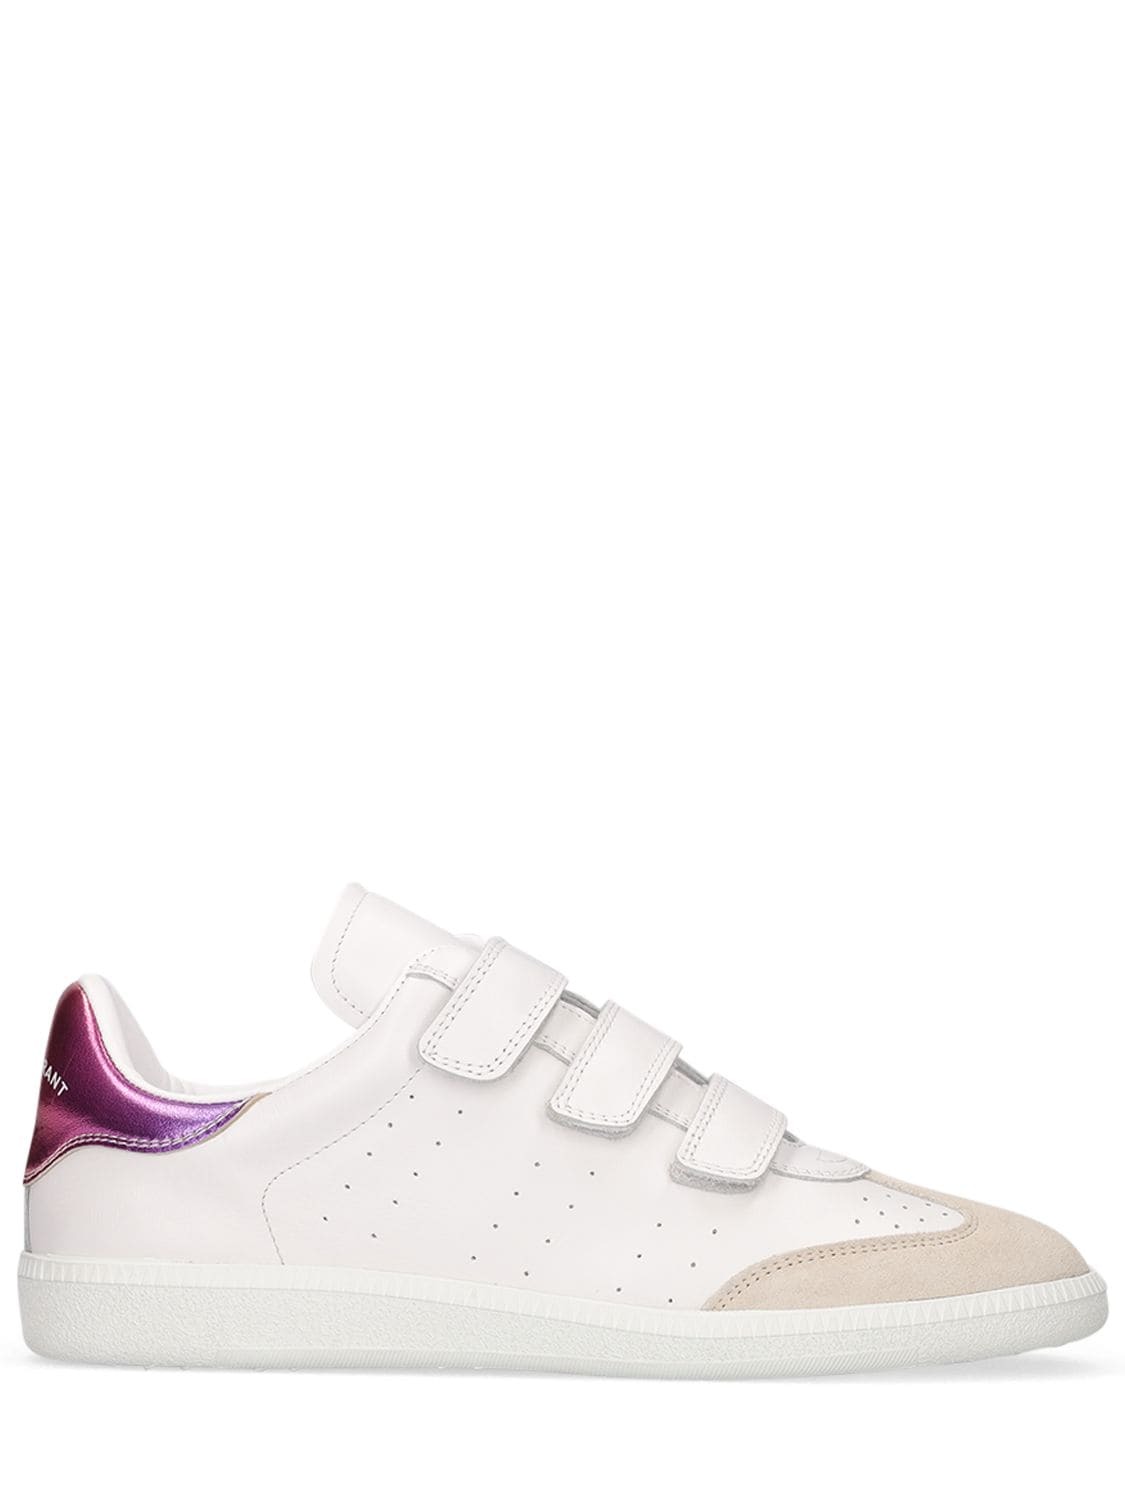 ISABEL MARANT 20mm Beth Leather & Suede Sneakers in white / multi